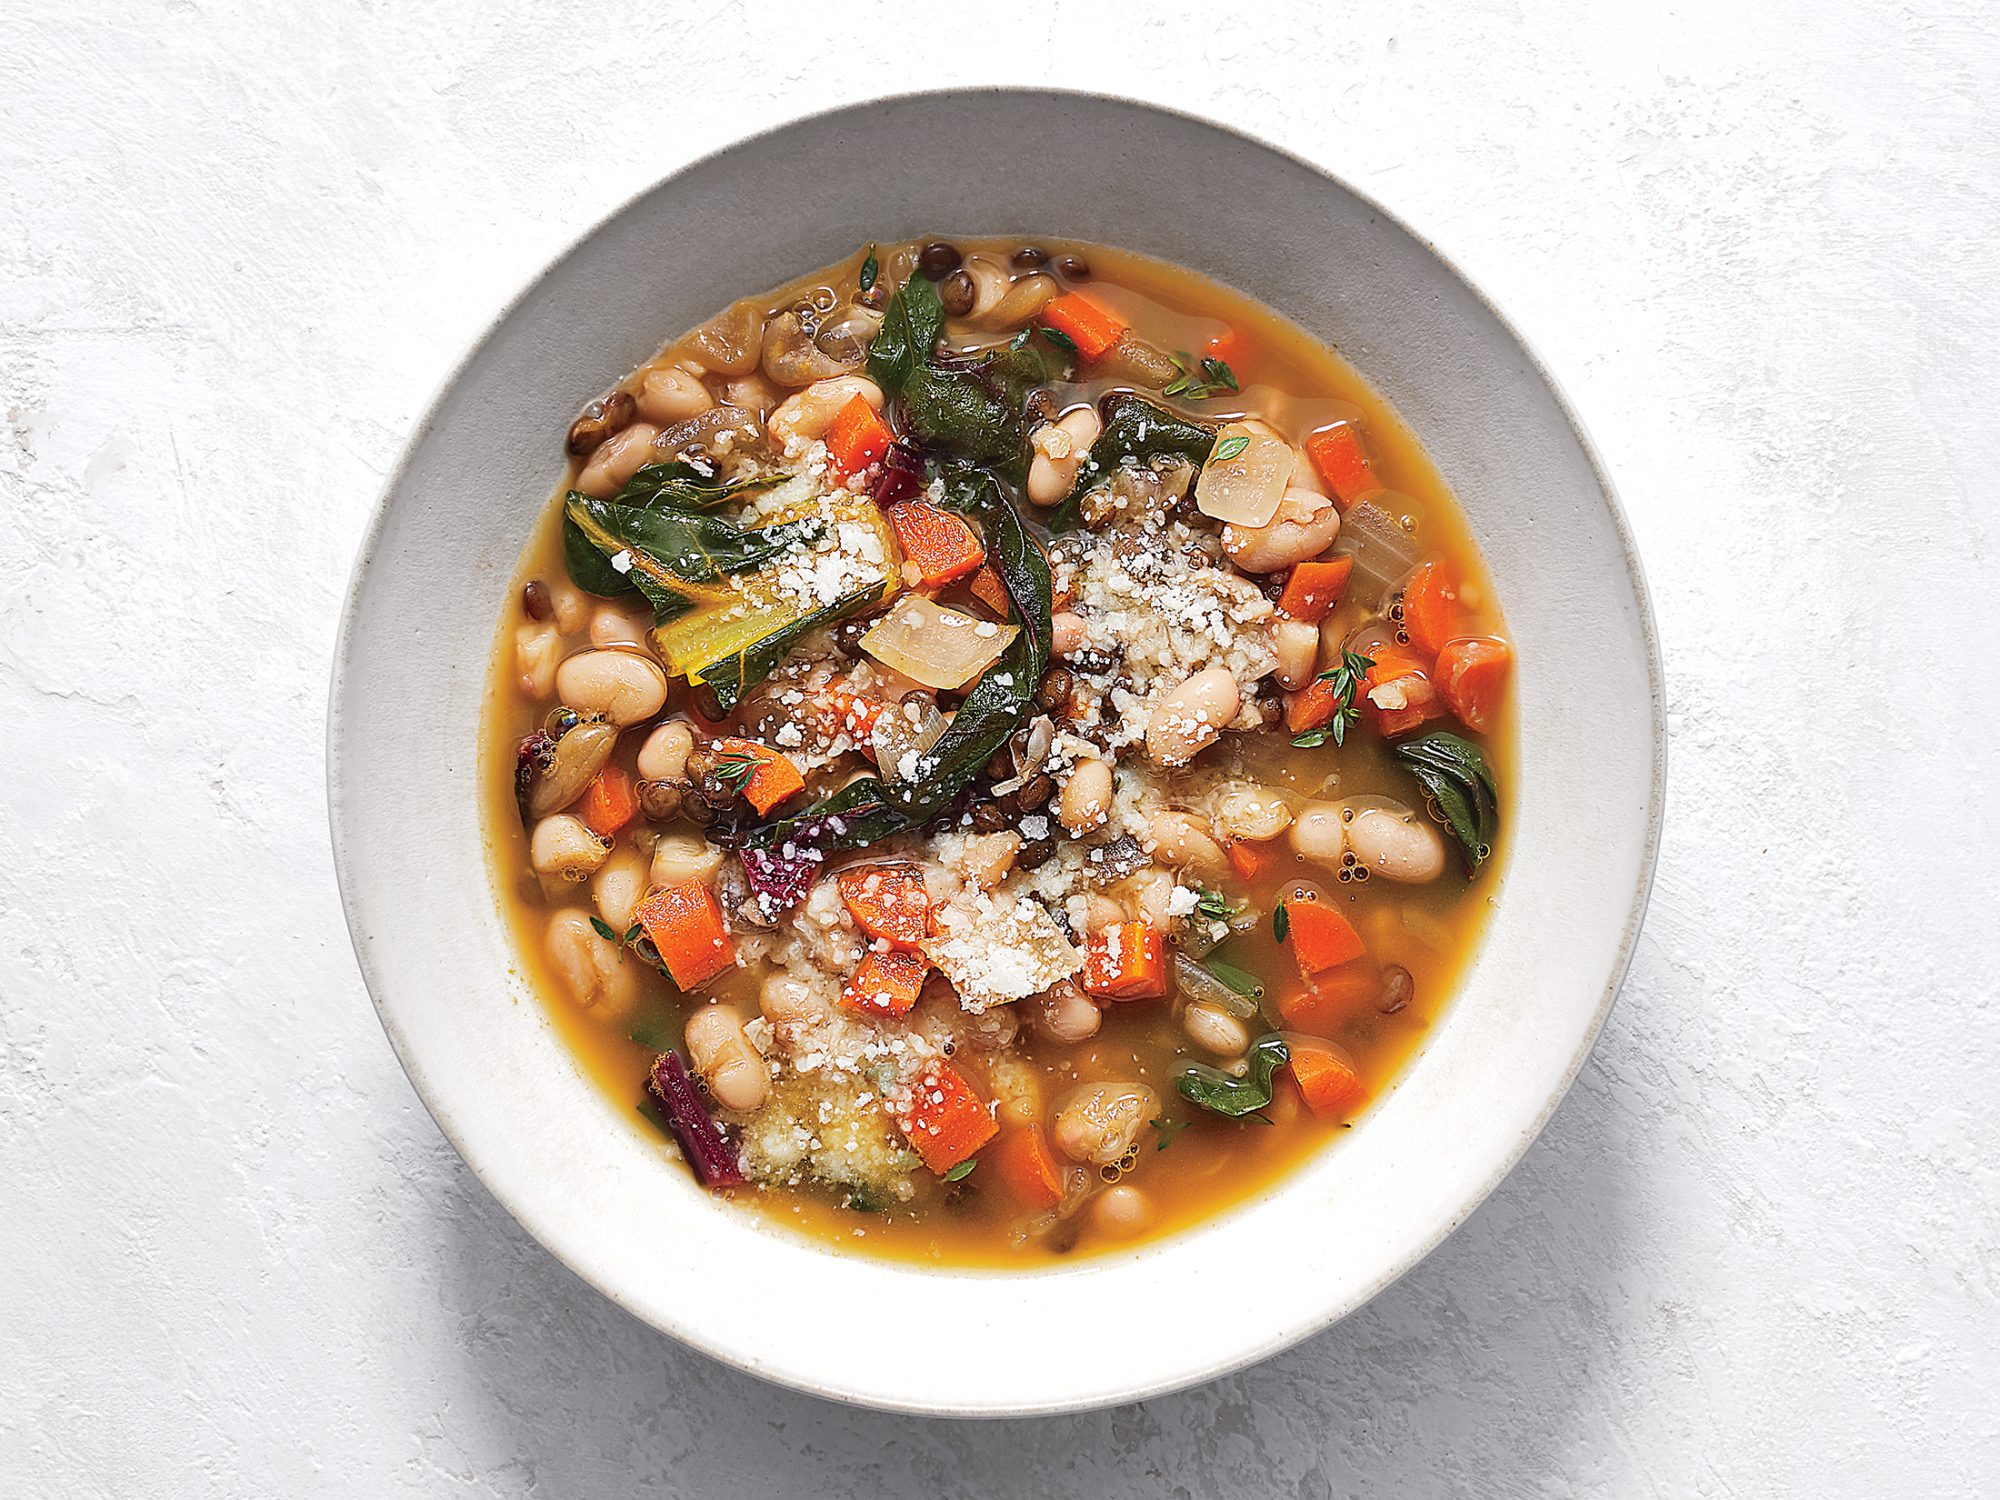 Tuscan White Bean and Lentil Soup